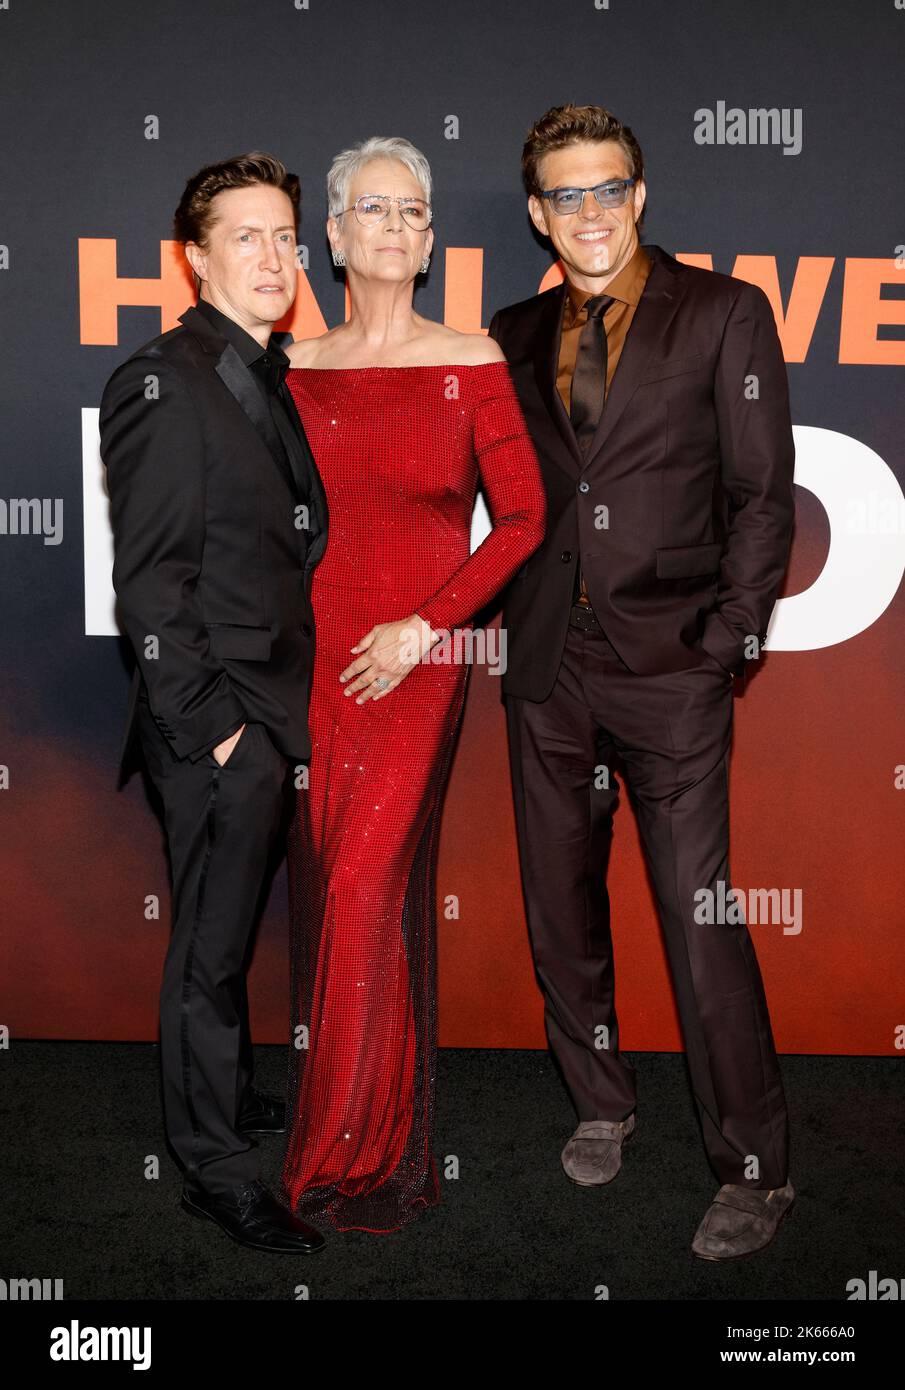 Los Angeles, USA. 11th Oct, 2022. Los Angeles, USA - Oct 11, 2022:David Gordon Green, Jamie Lee Curtis and Jason Blum attend the premiere of 'Halloween Ends' held at TCL Chinese Theatre Credit: Ovidiu Hrubaru/Alamy Live News Stock Photo